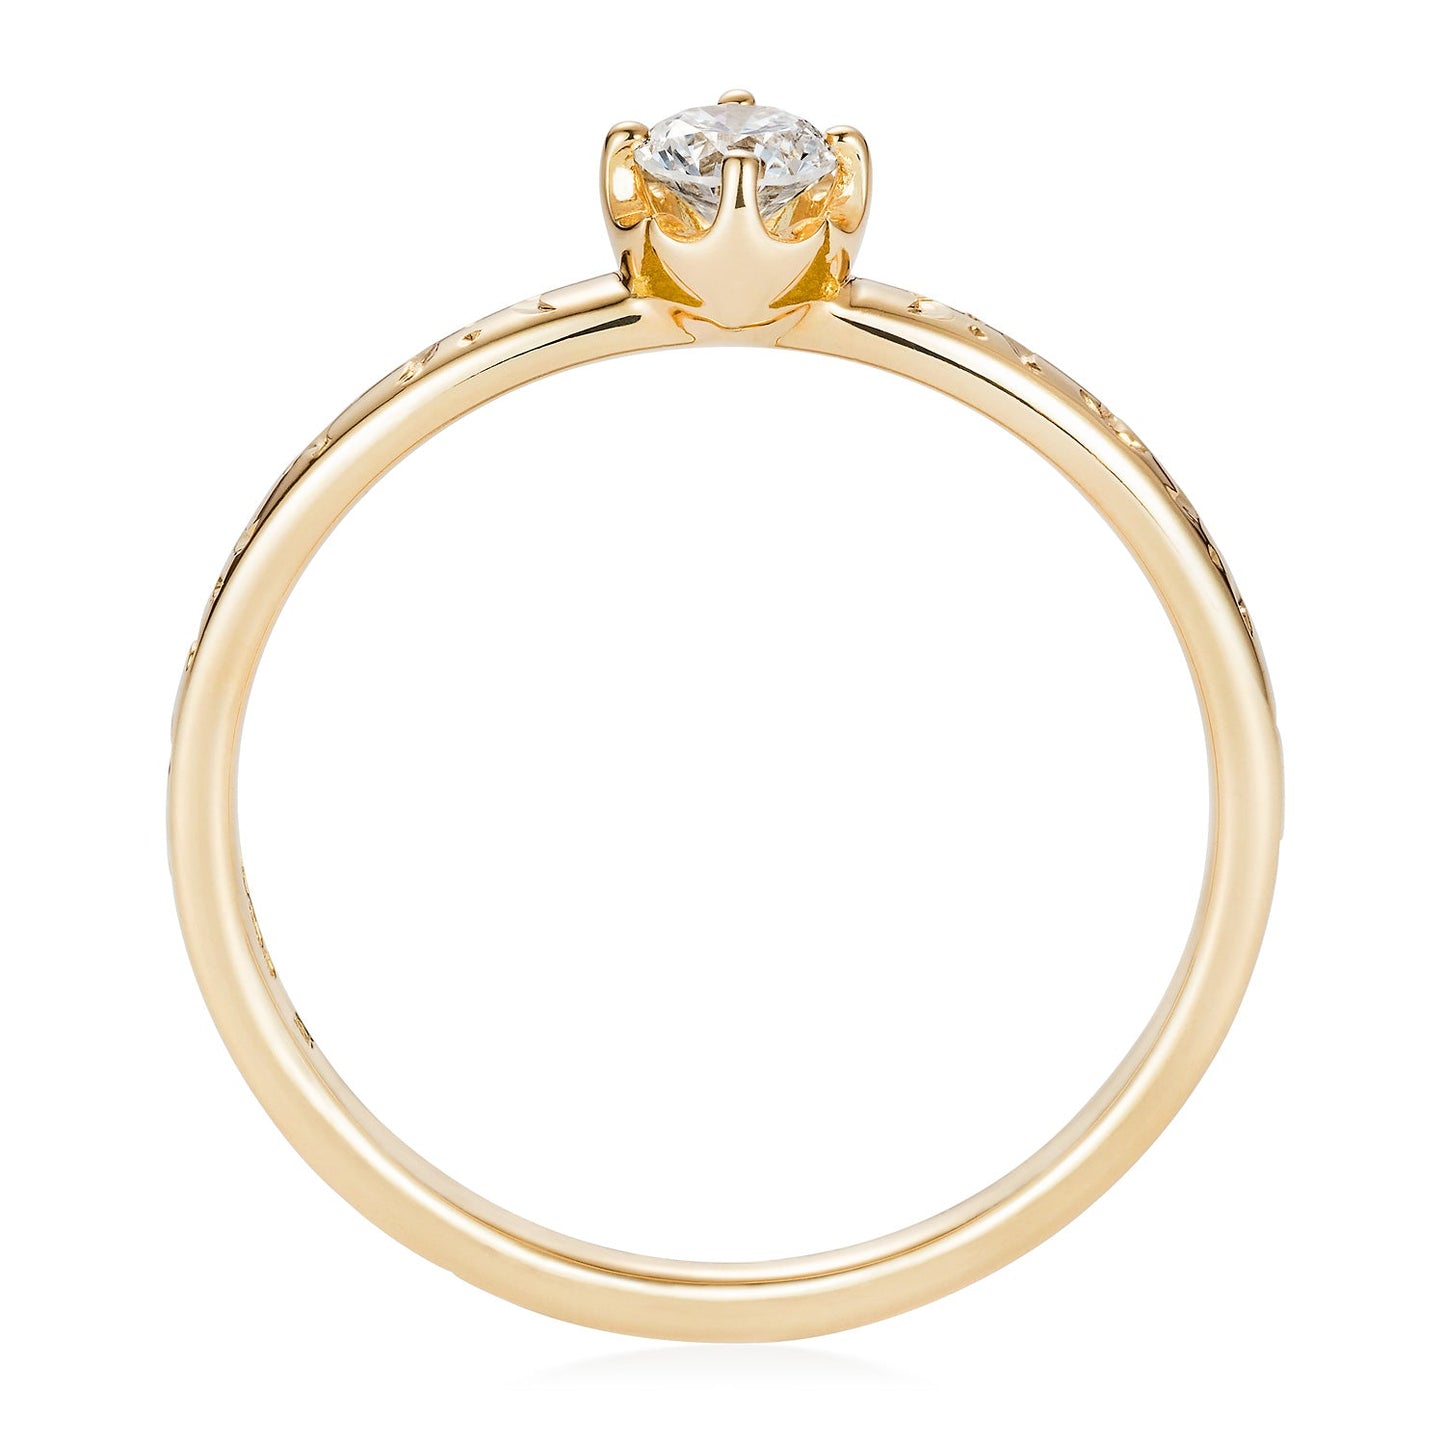 Queen Boudicca Engagement Ring by Yasmin Everley